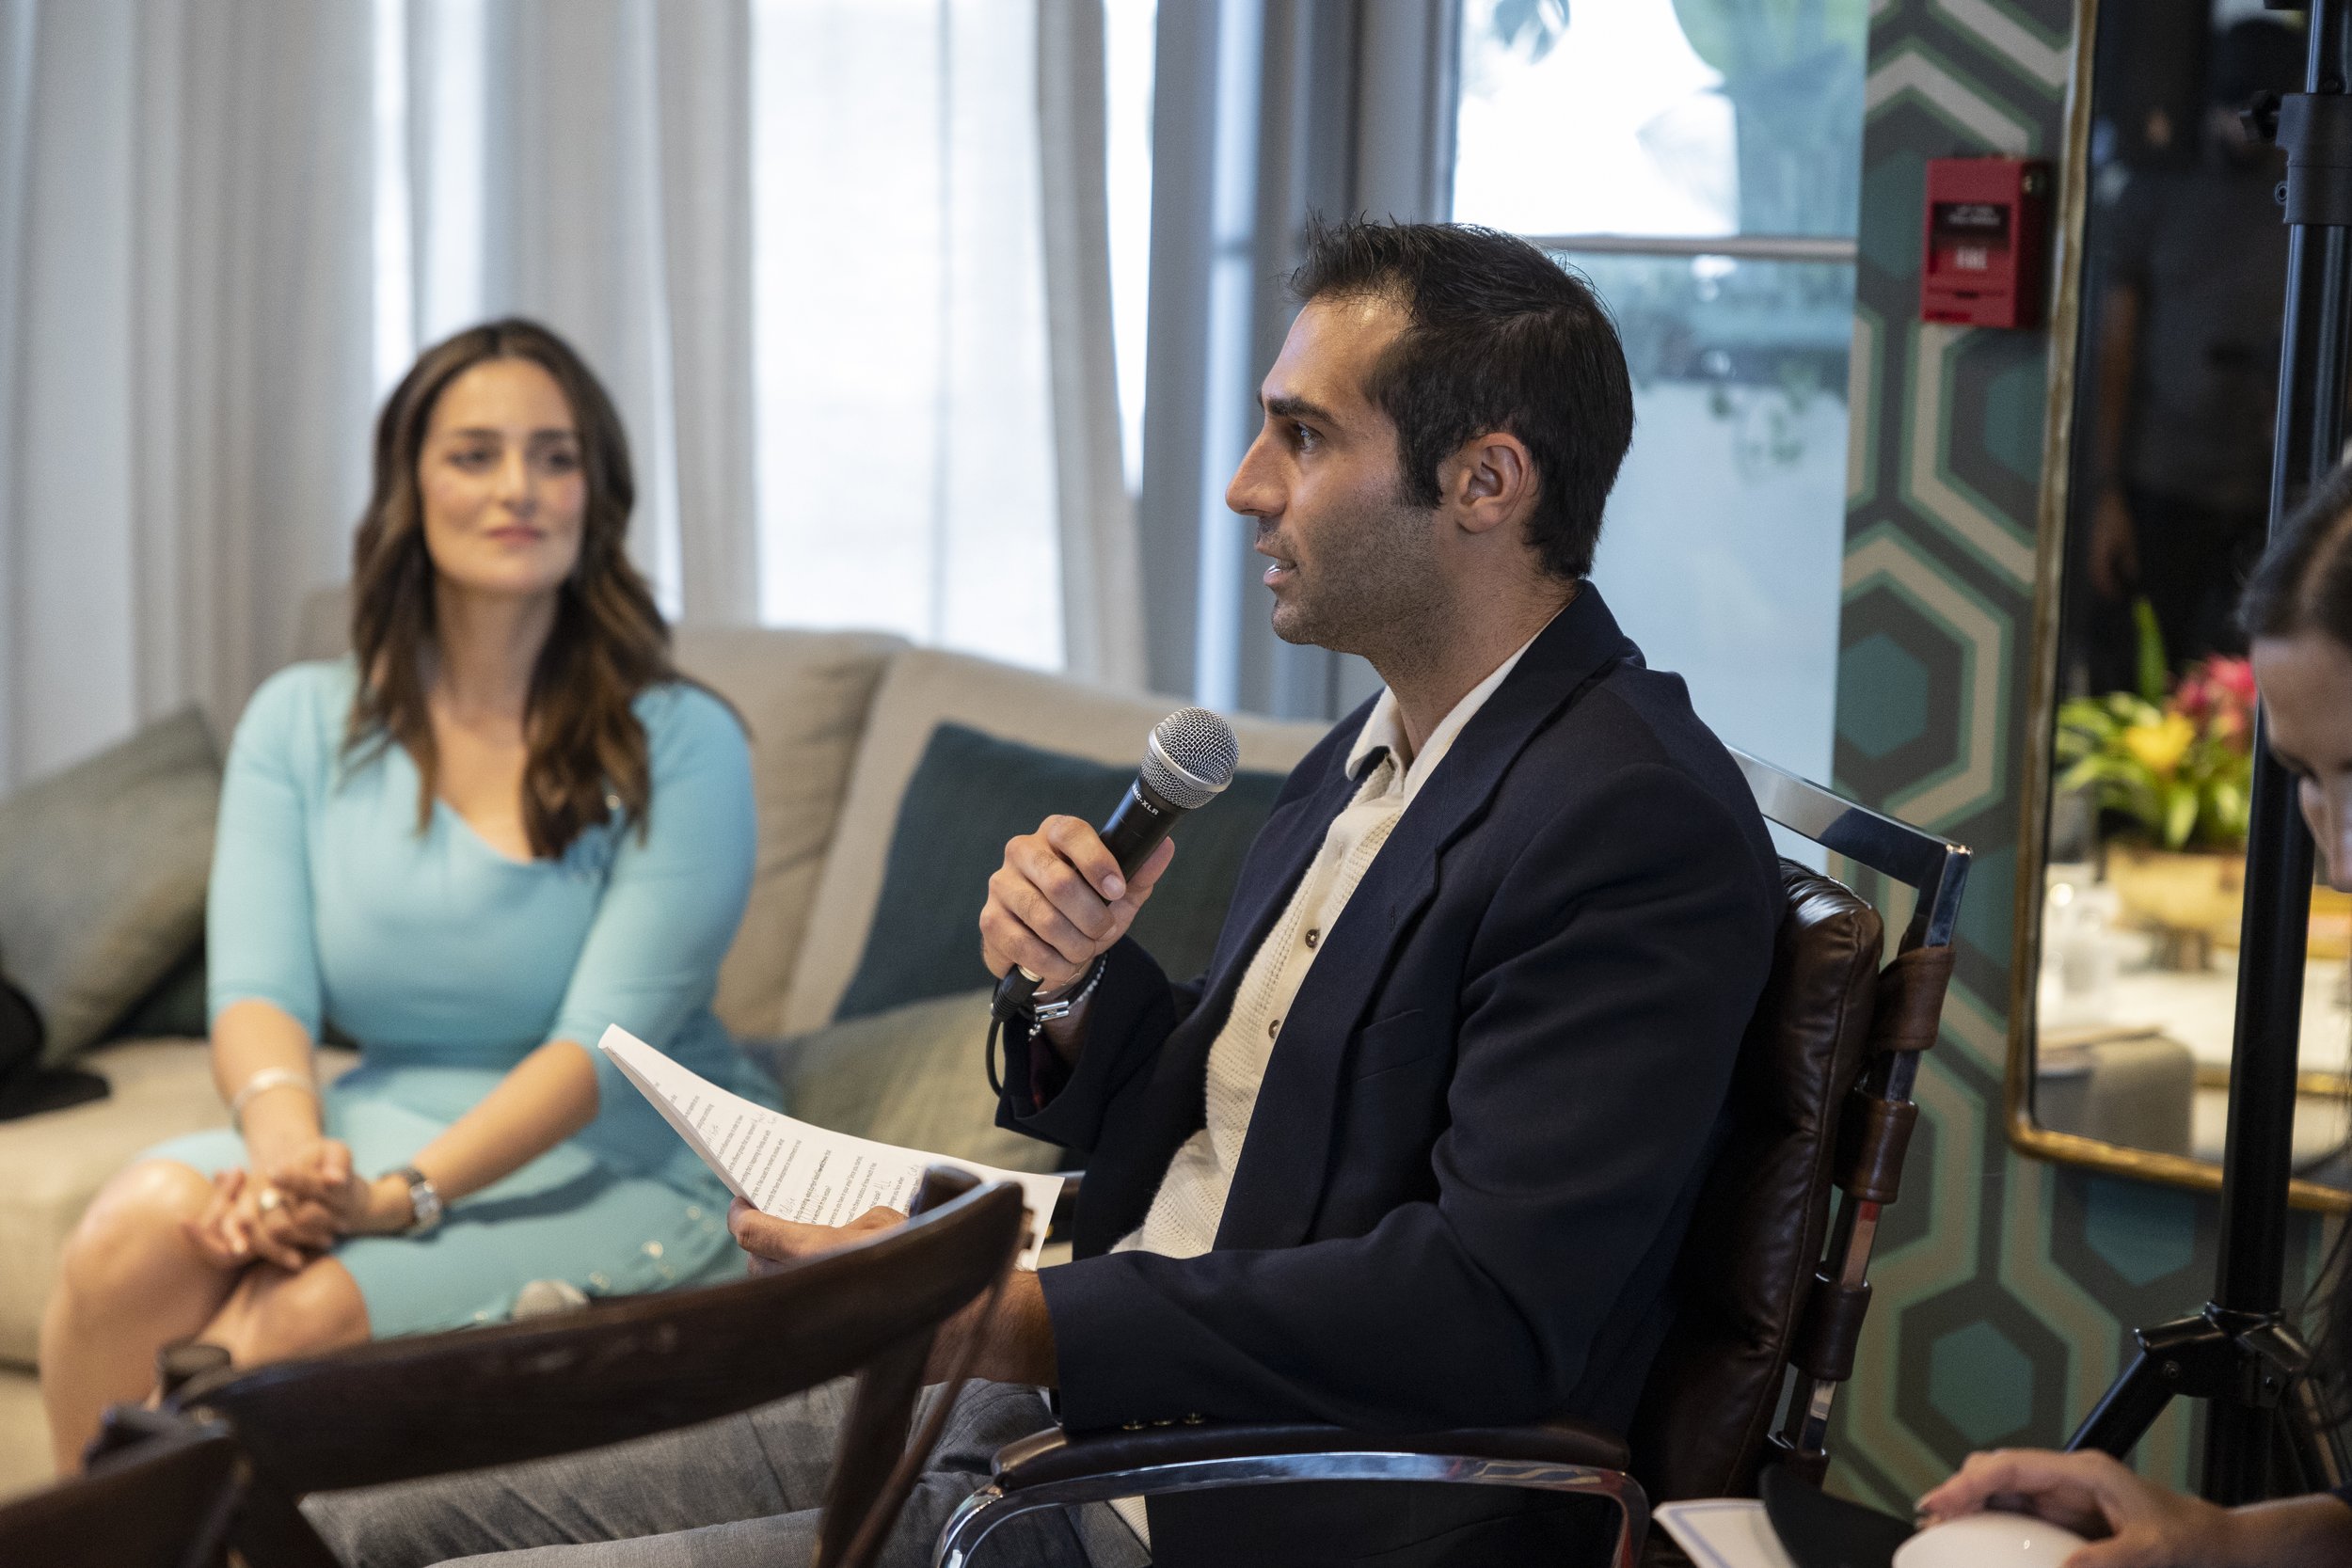 Inside 'An Exploration Into Capital Markets Coral Gables' Presented By PROFILEmiami & MG Developer127.JPG